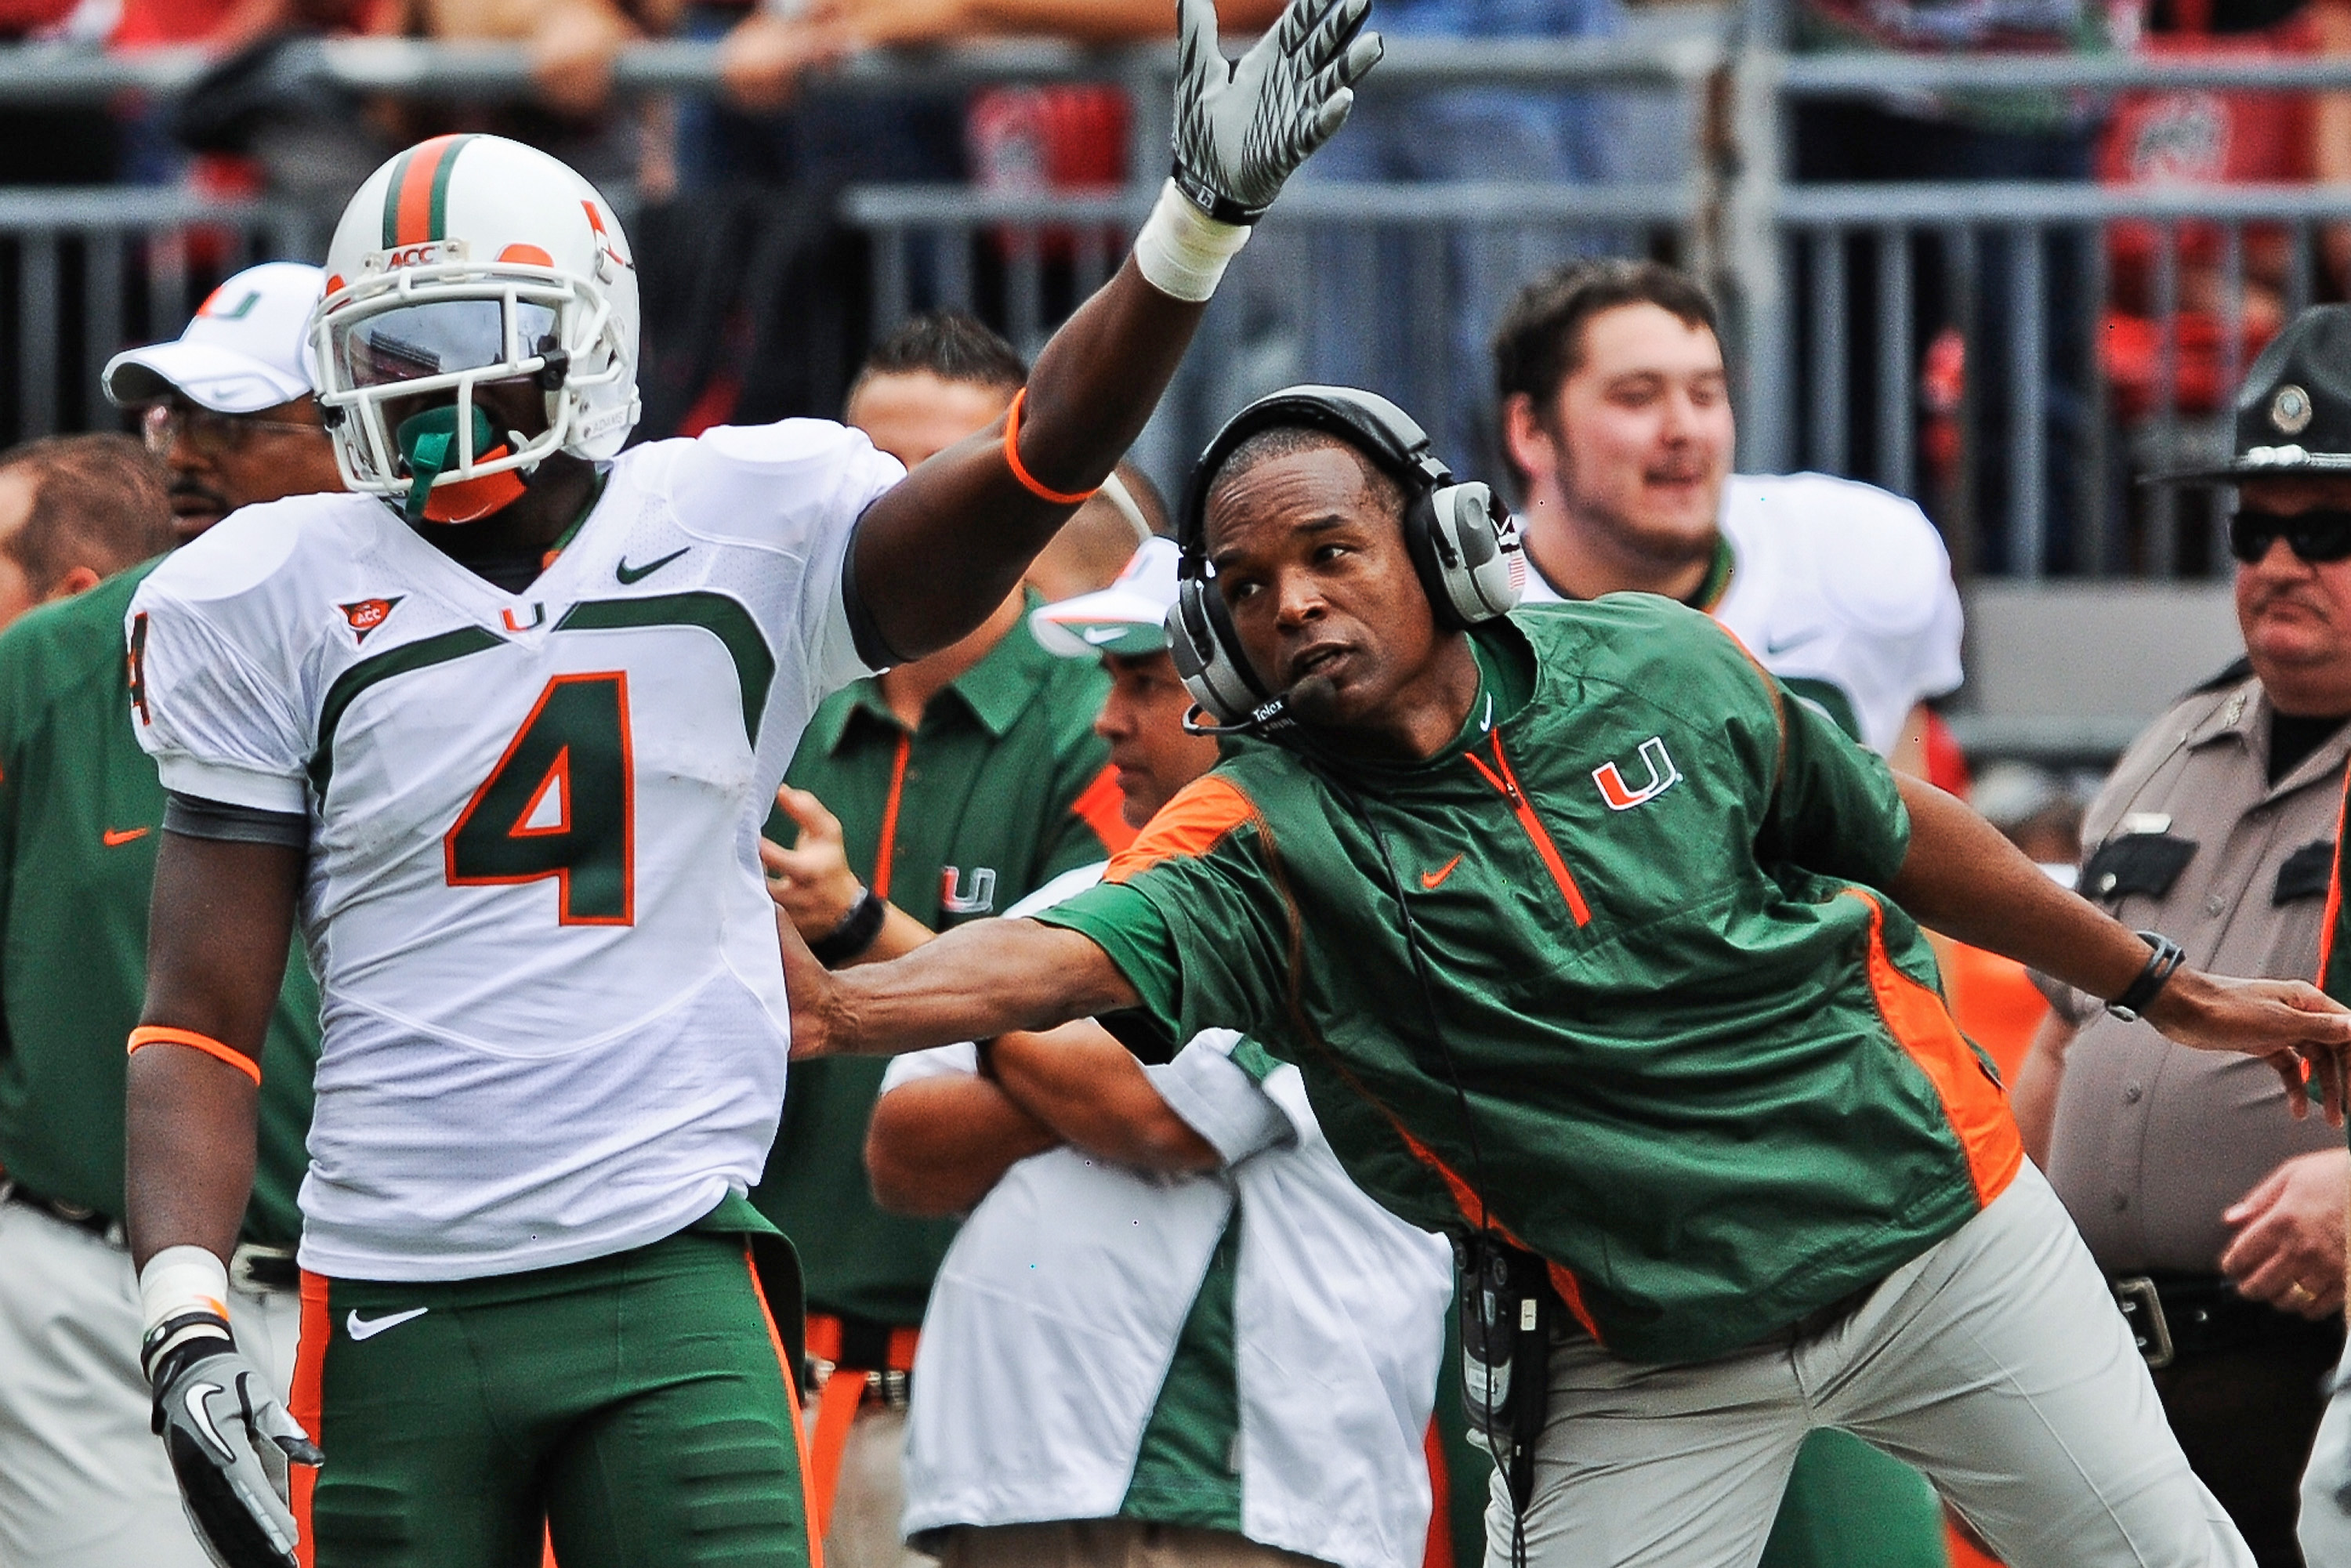 COLUMBUS, OH - SEPTEMBER 11:  Head Coach Randy Shannon of the Miami Hurricanes congratulates Aldarius Johnson #4 of the Hurricanes after a first down catch against the Ohio State Buckeyes at Ohio Stadium on September 11, 2010 in Columbus, Ohio.  (Photo by